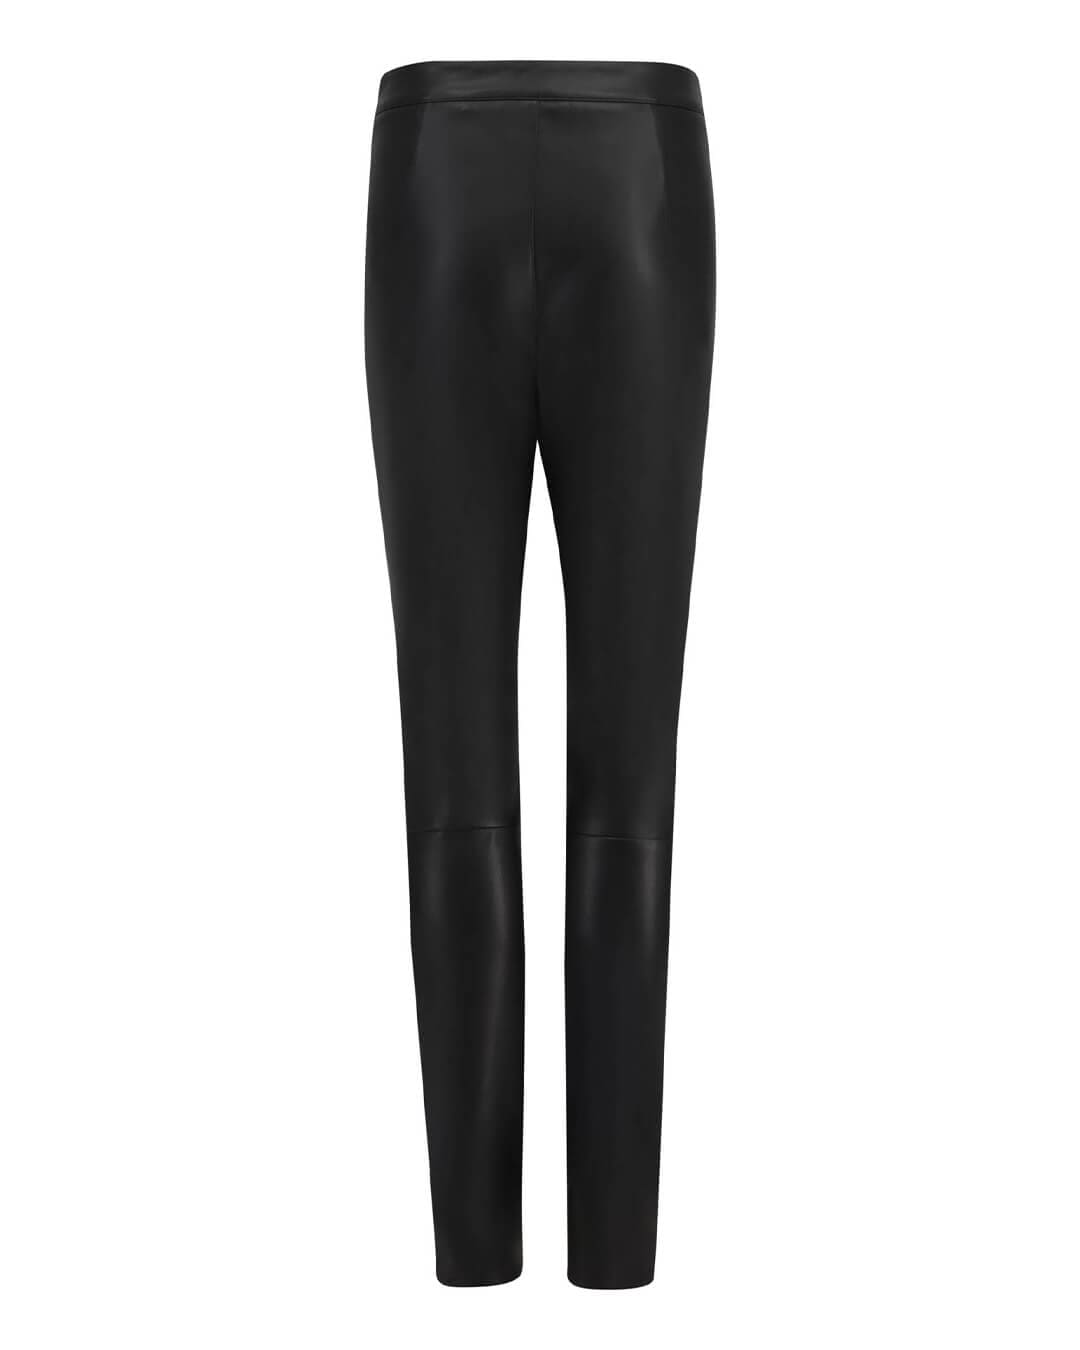 Fynch-Hatton Trousers Fynch-Hatton Black Leather Optic Trousers